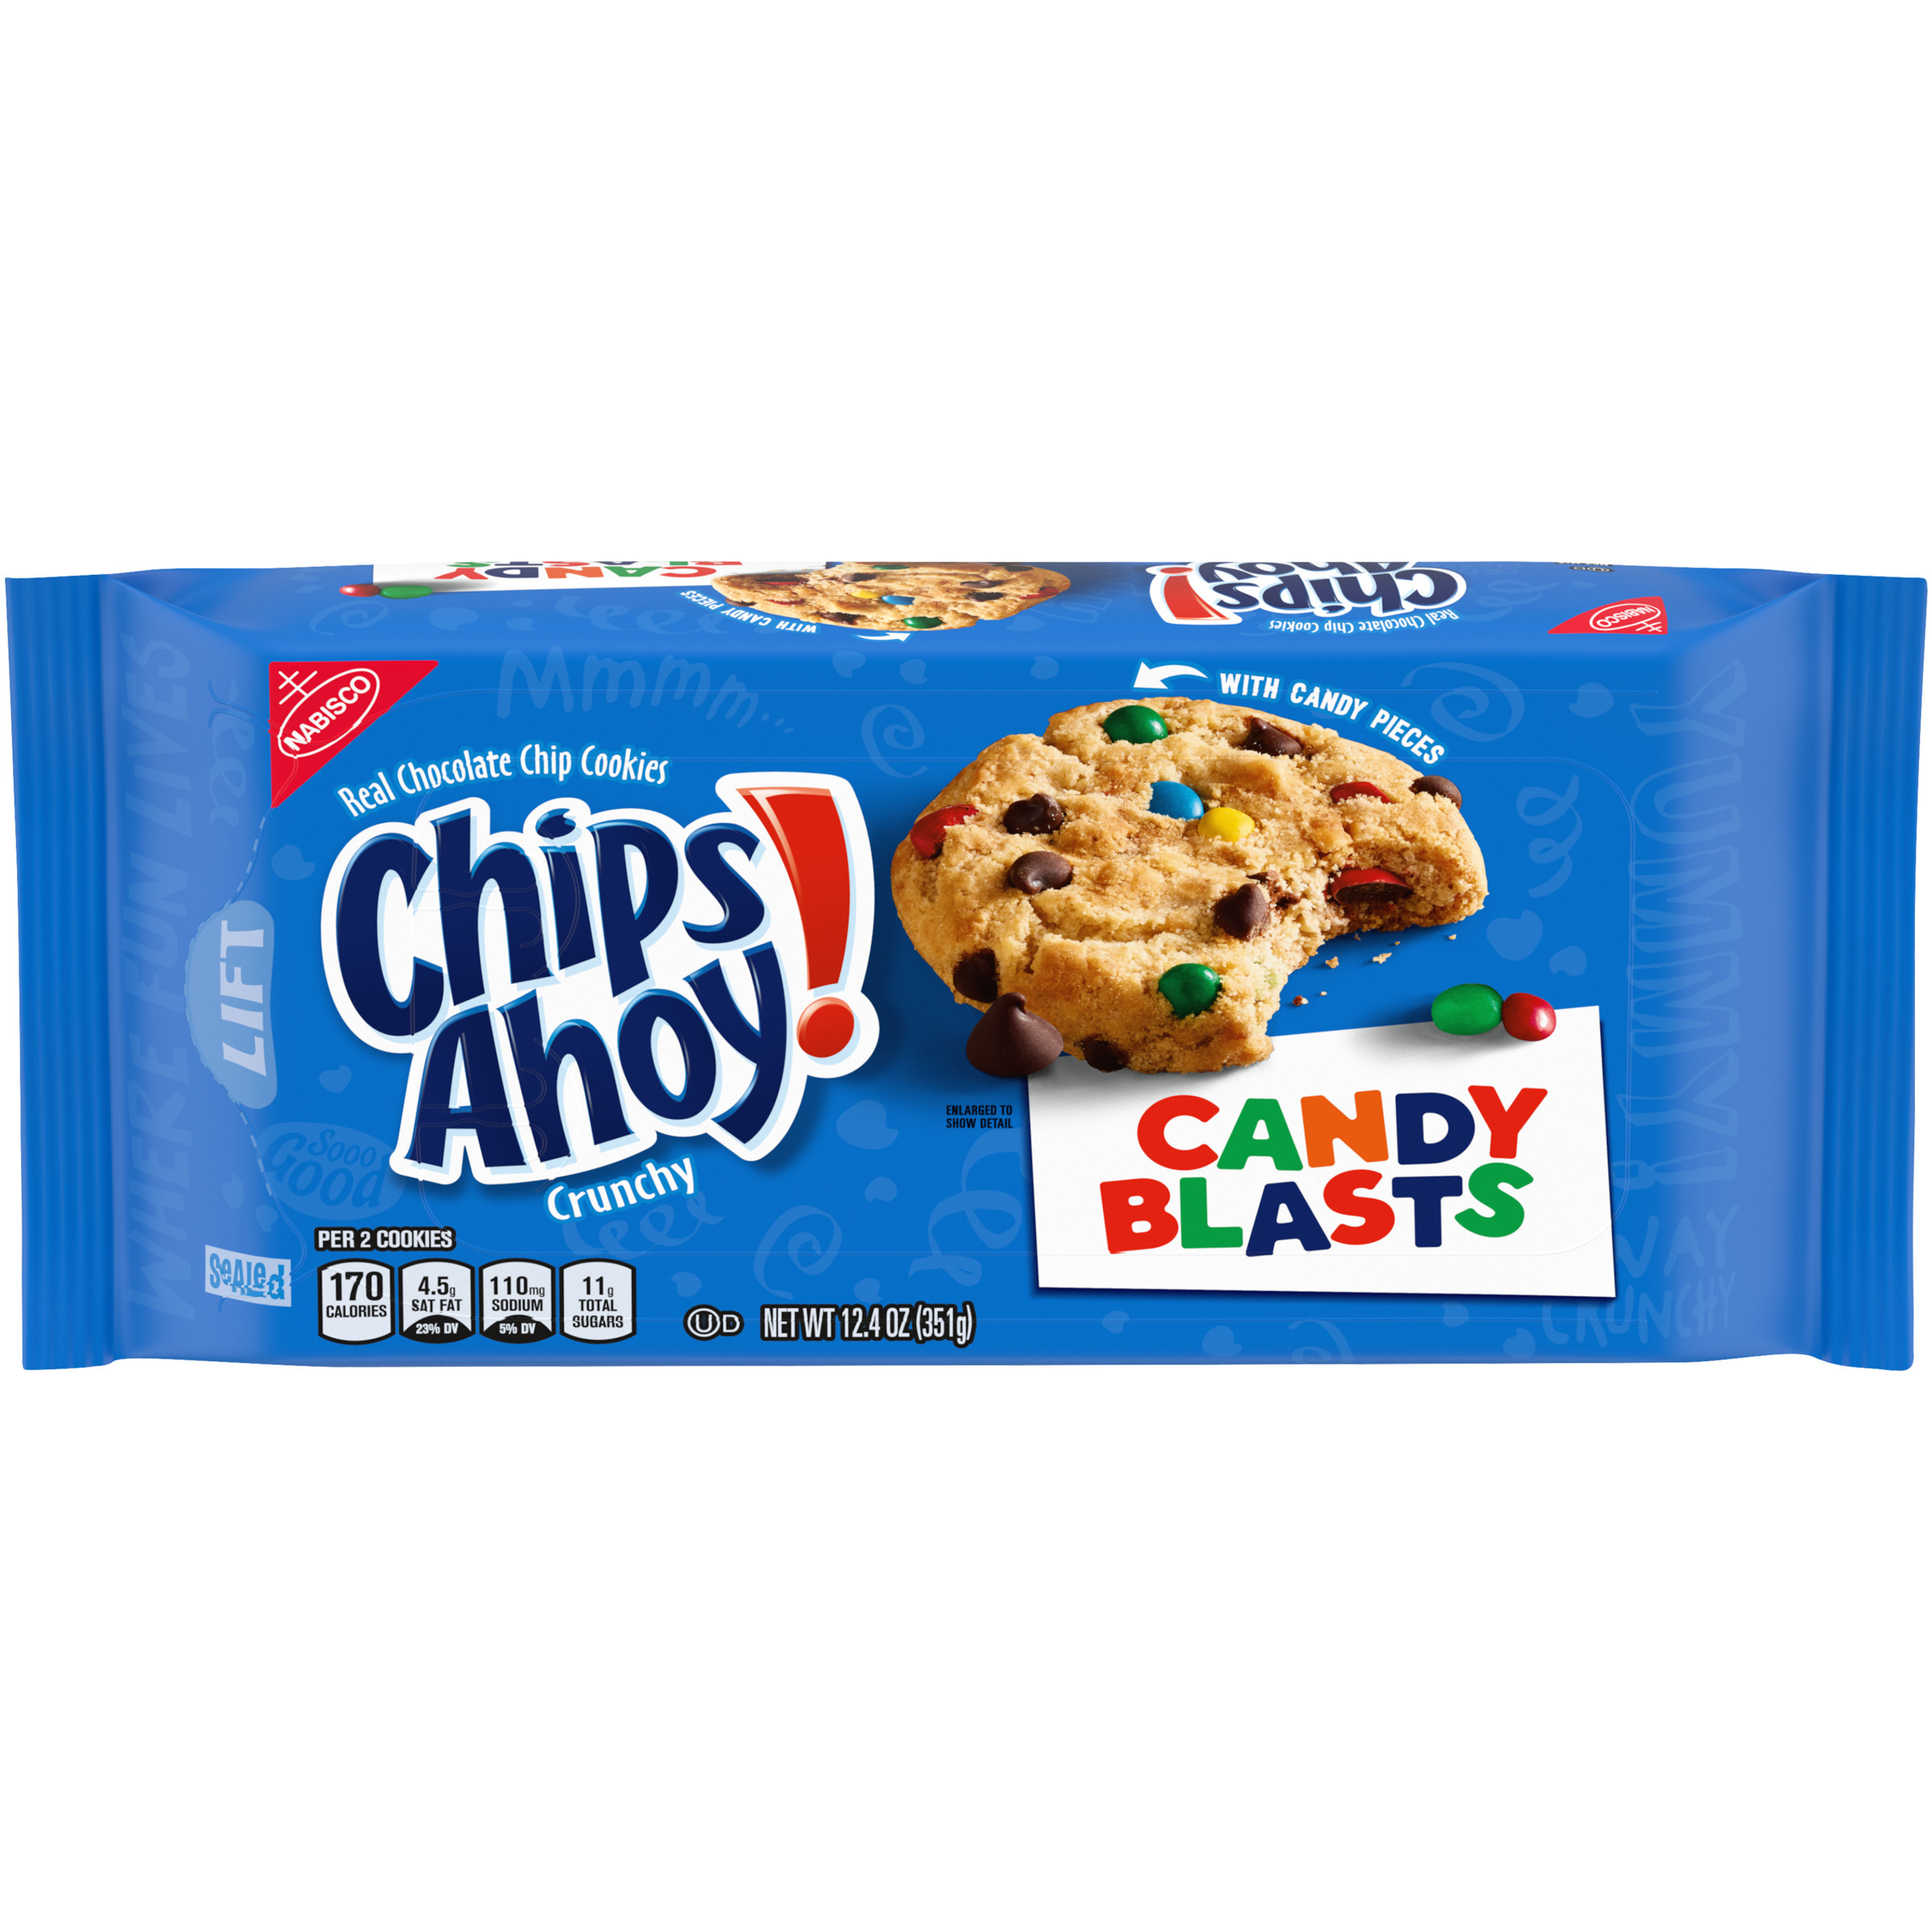 CHIPS AHOY! Candy Blasts Cookies, 12.4 oz